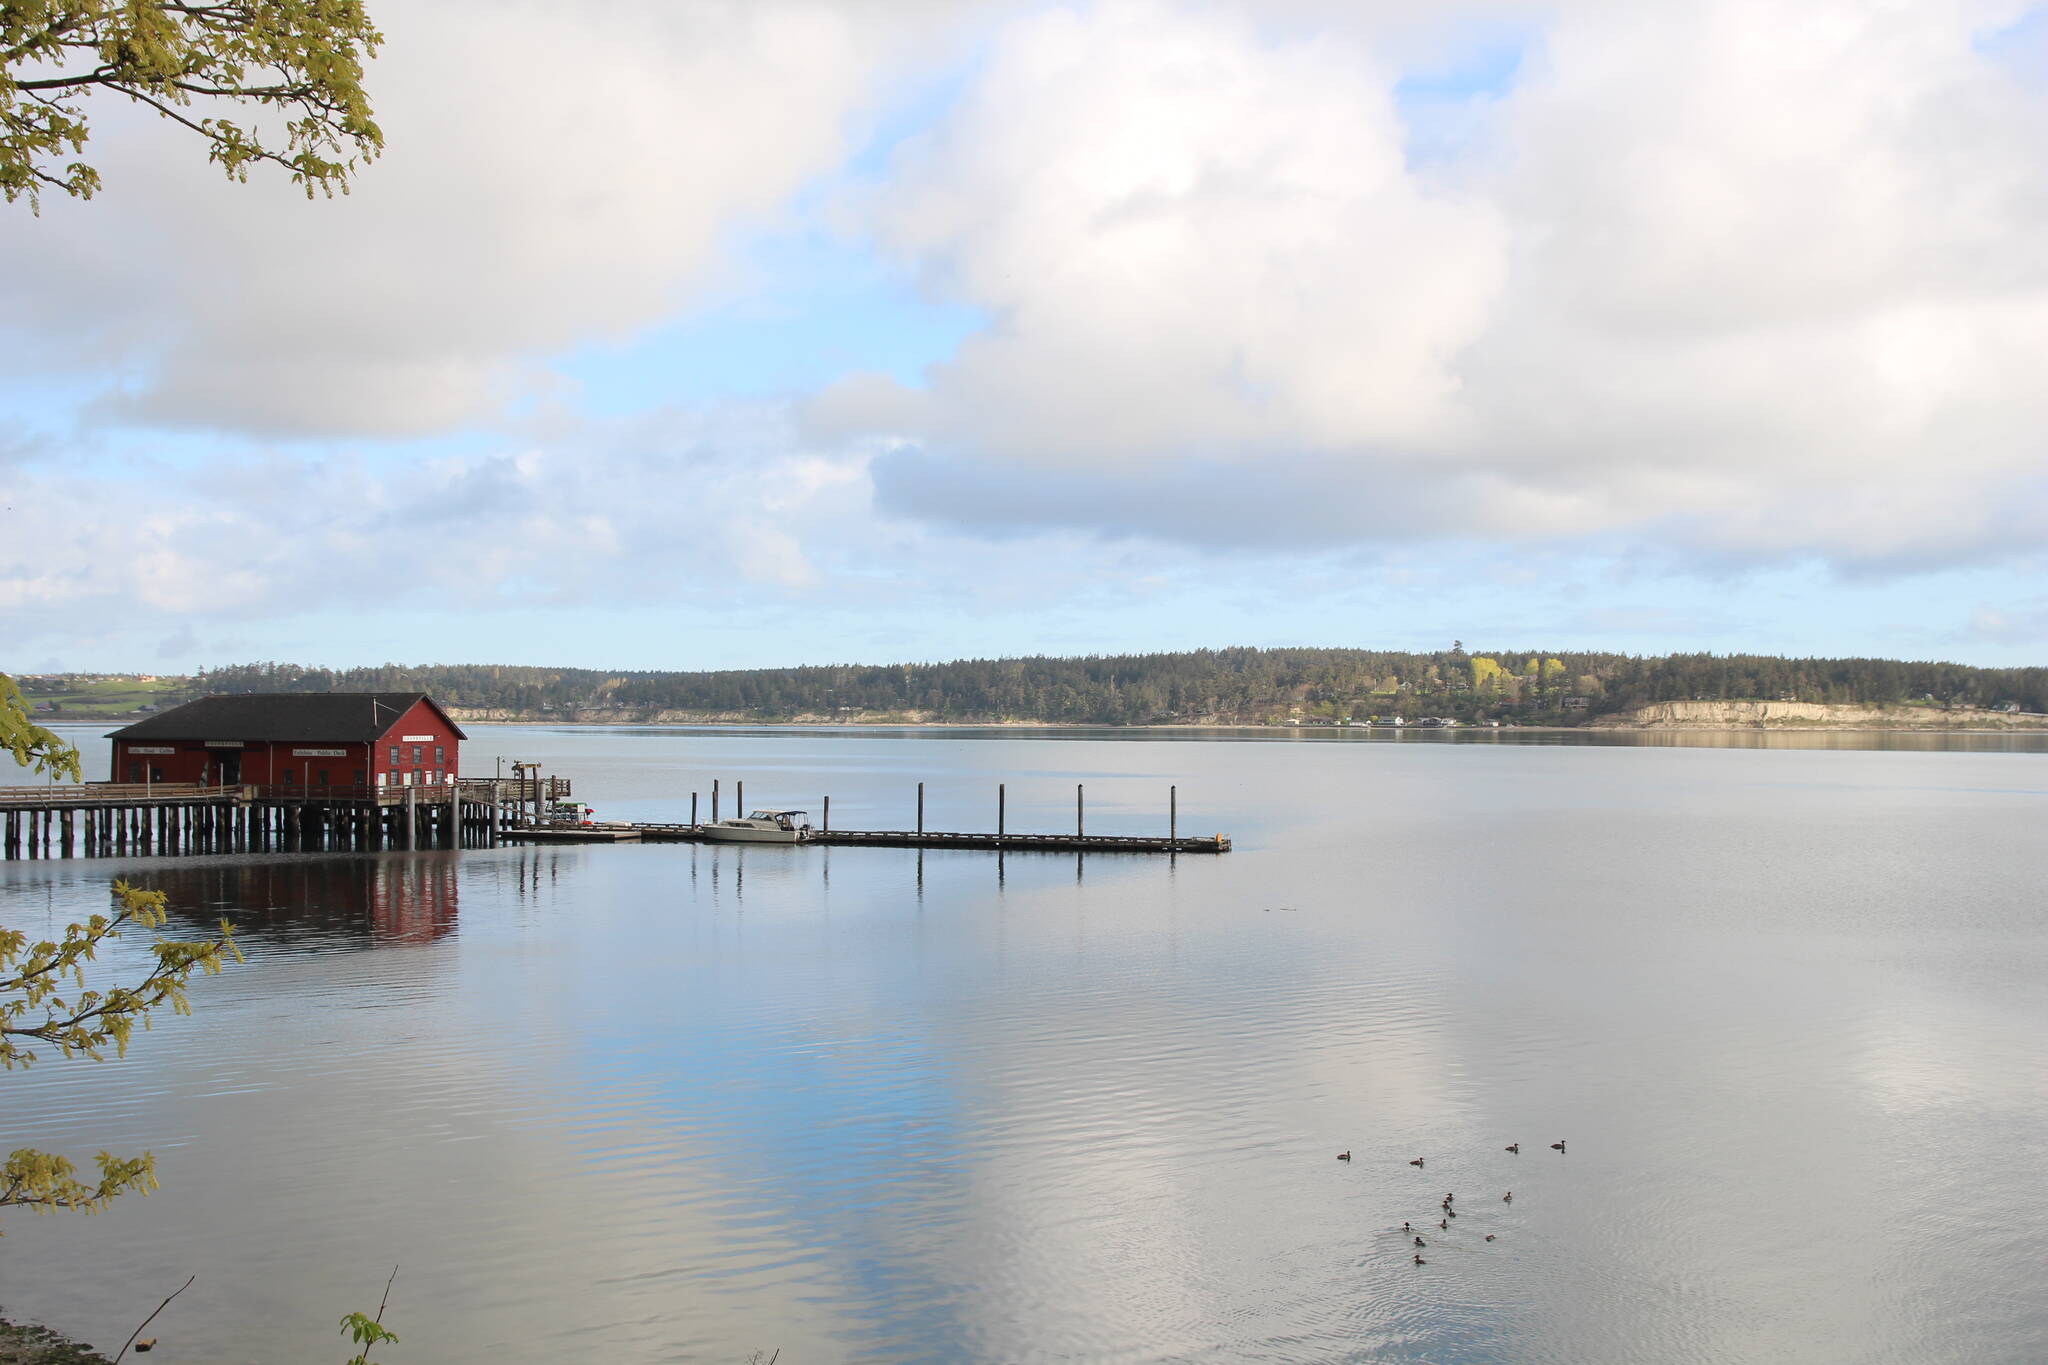 The Town of Coupeville is looking at ways to reuse wastewater and reduce nitrogen levels in the water that flows into Penn Cove. (Photo by Luisa Loi)